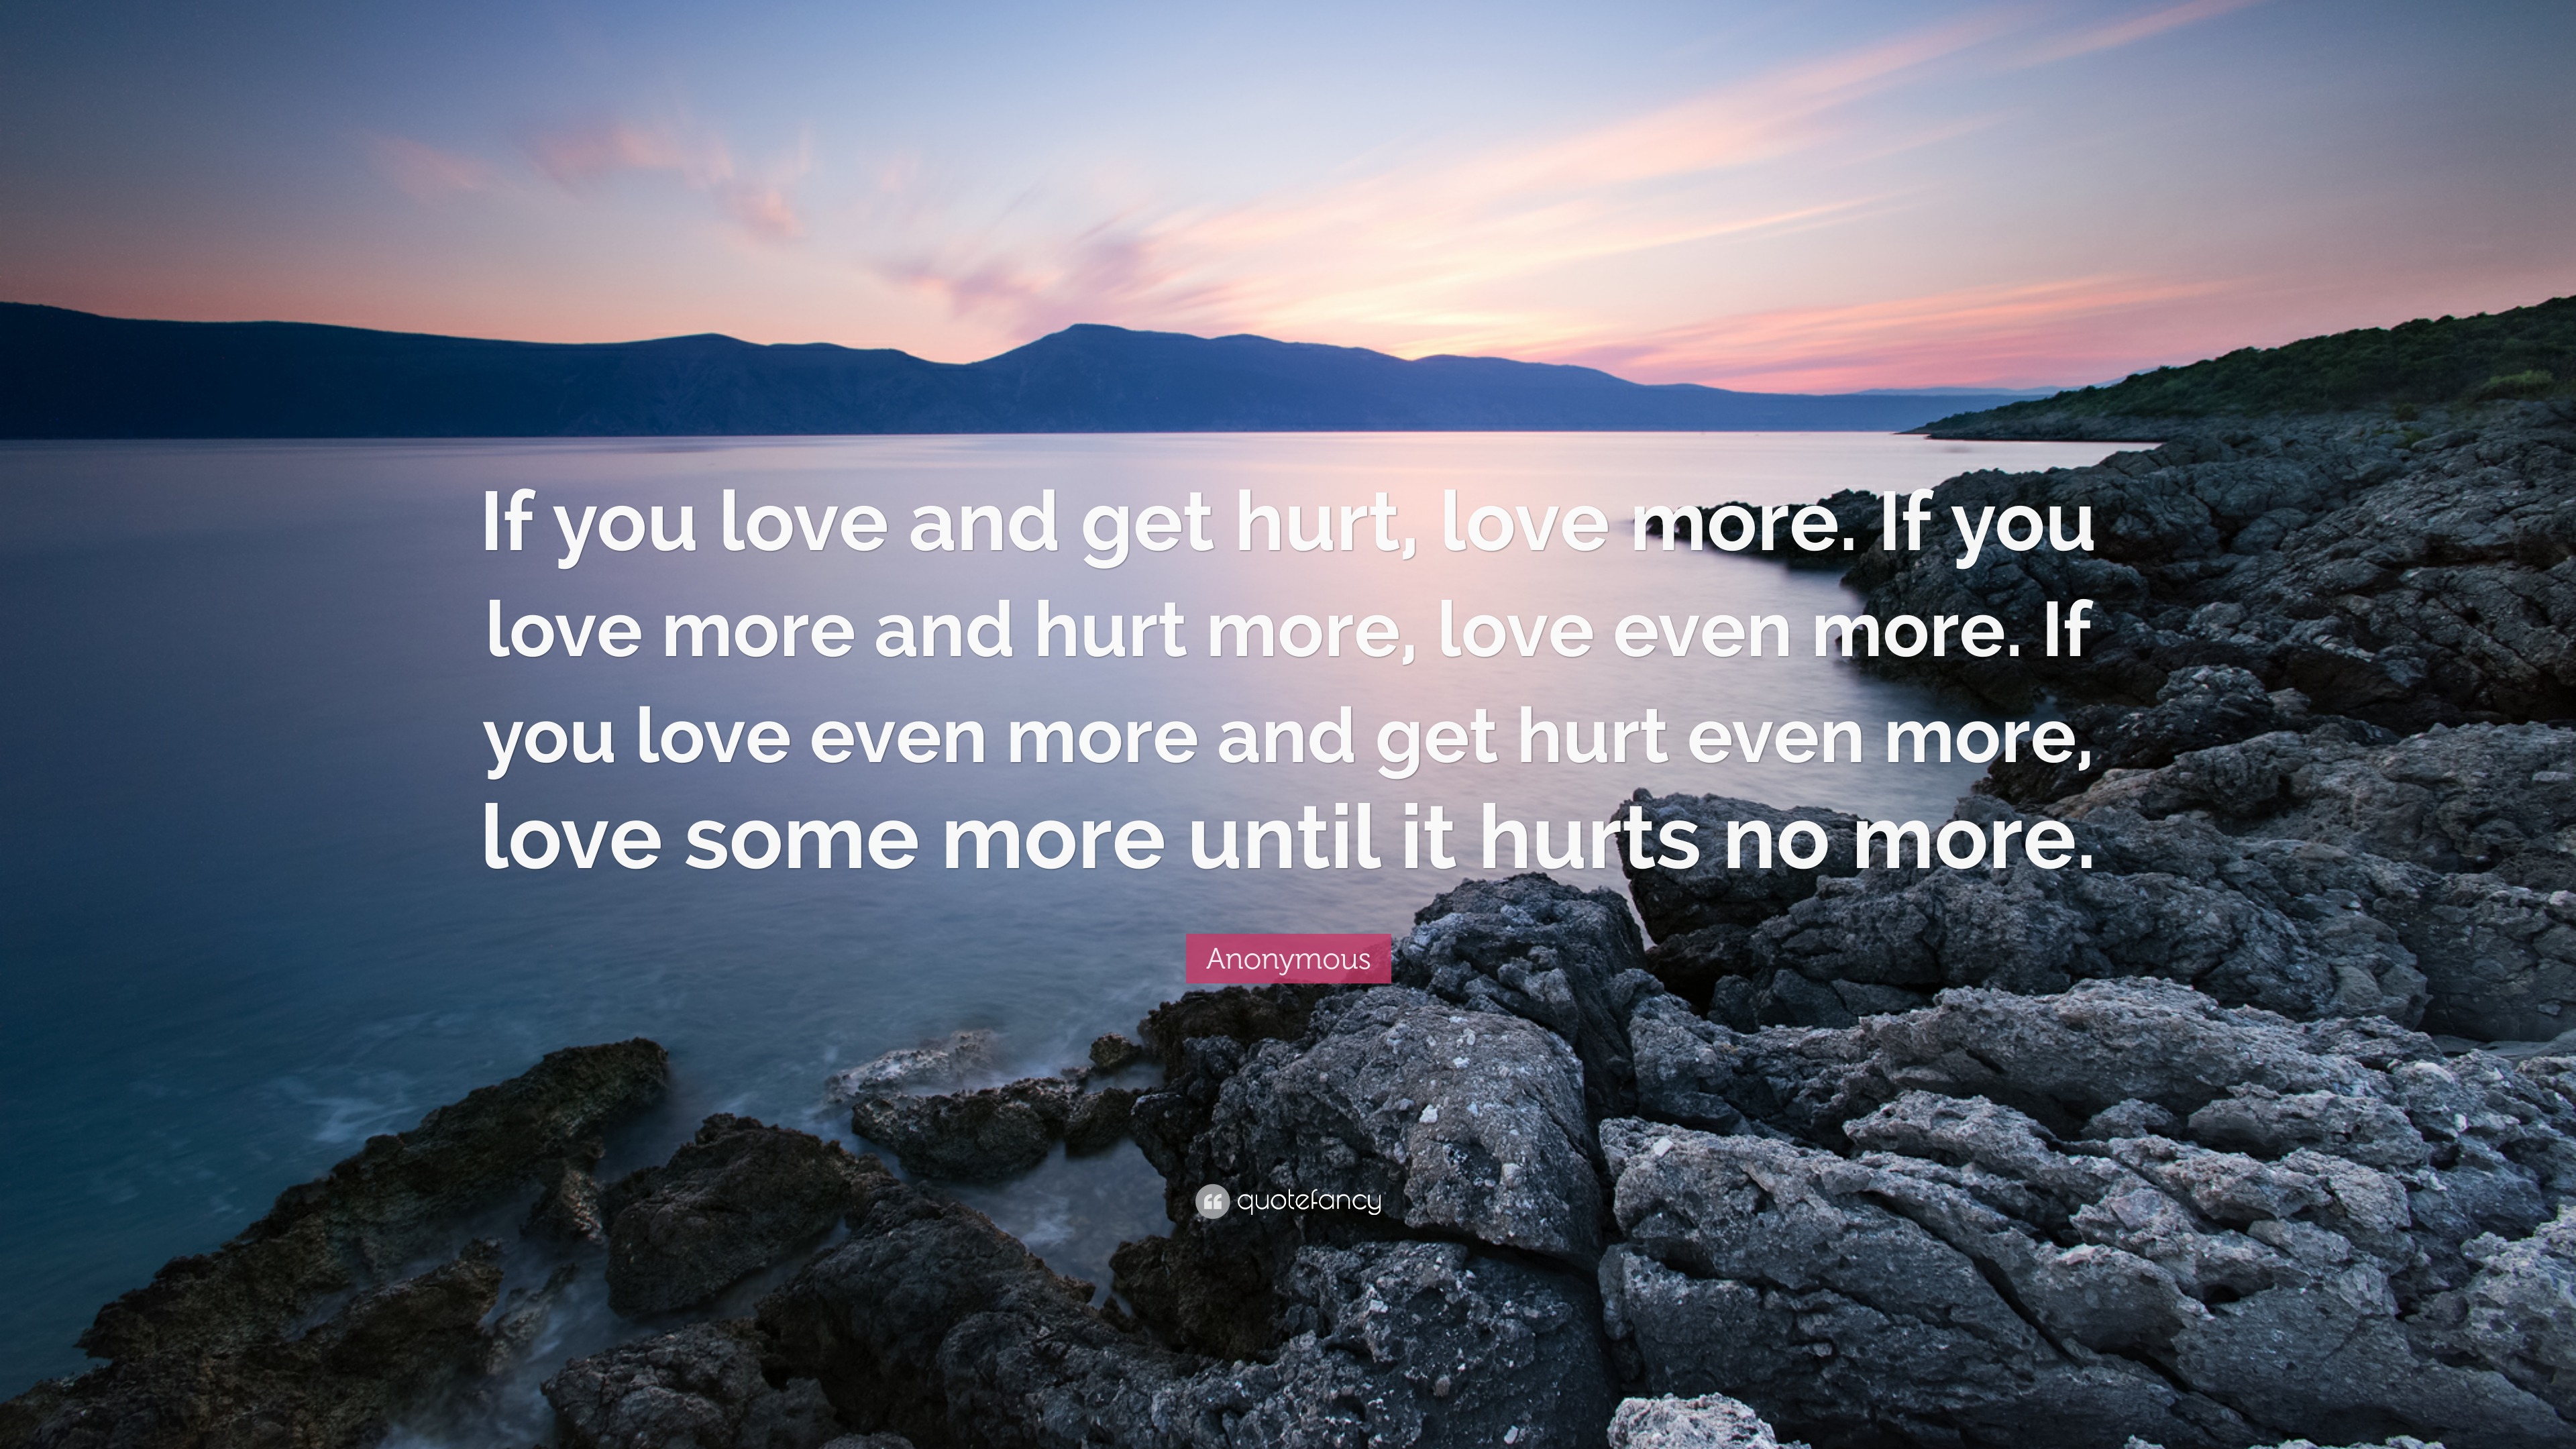 https://quotefancy.com/media/wallpaper/3840x2160/354842-William-Shakespeare-Quote-If-you-love-and-get-hurt-love-more-If.jpg